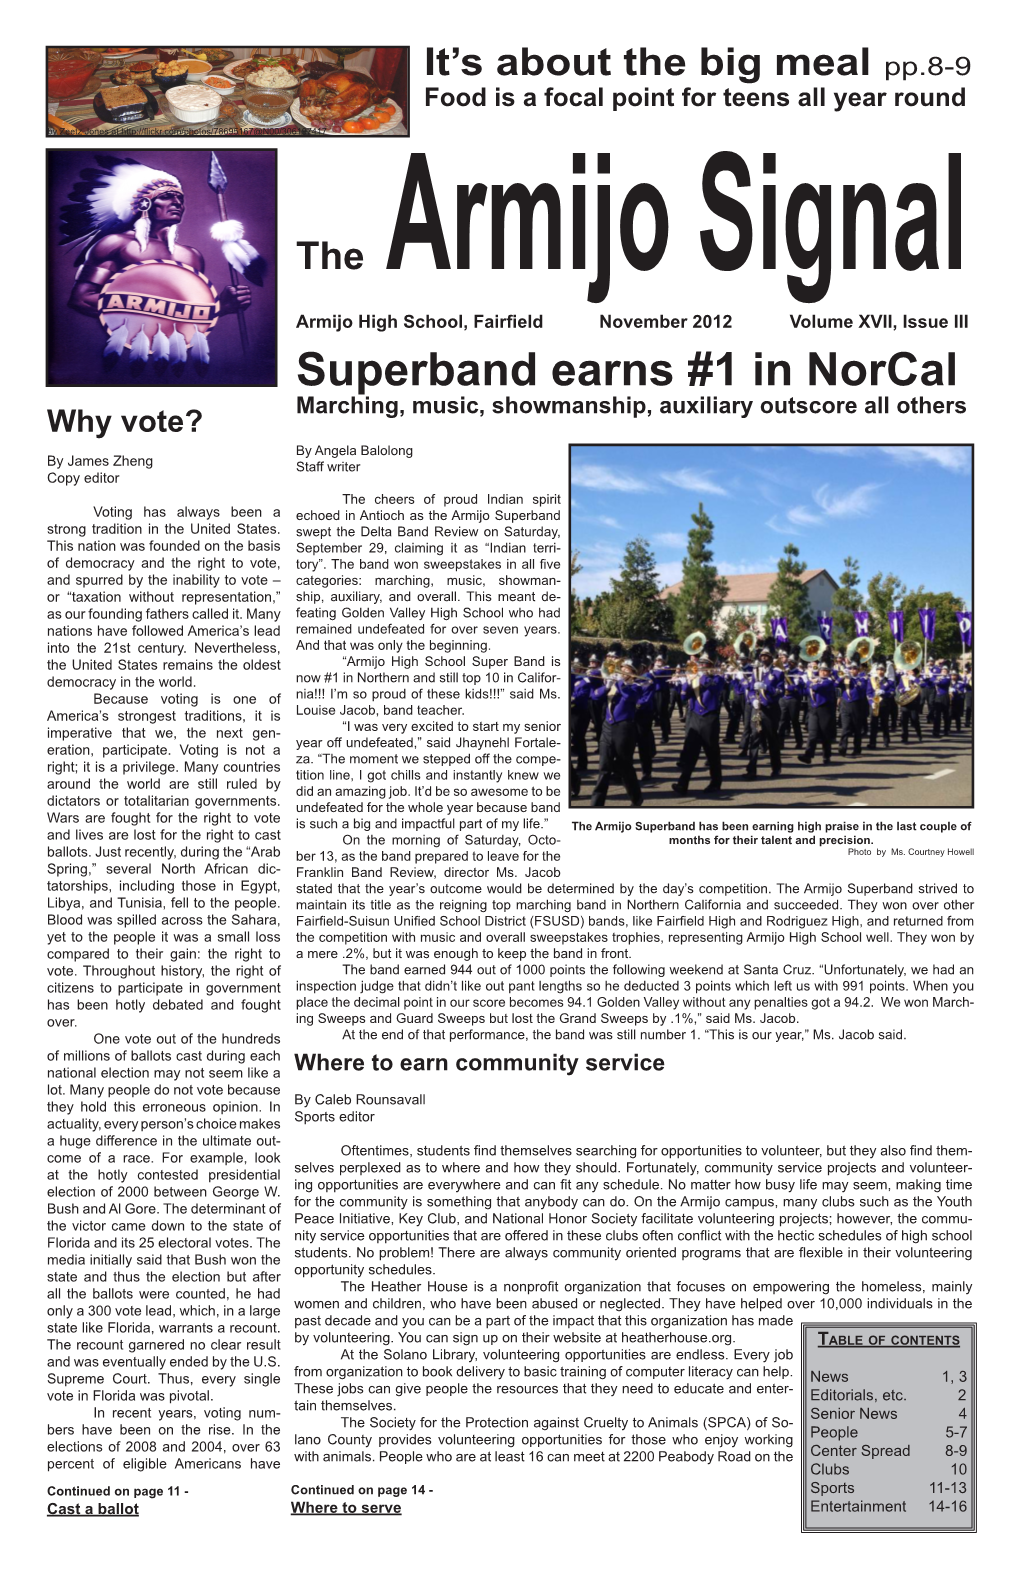 Superband Earns #1 in Norcal